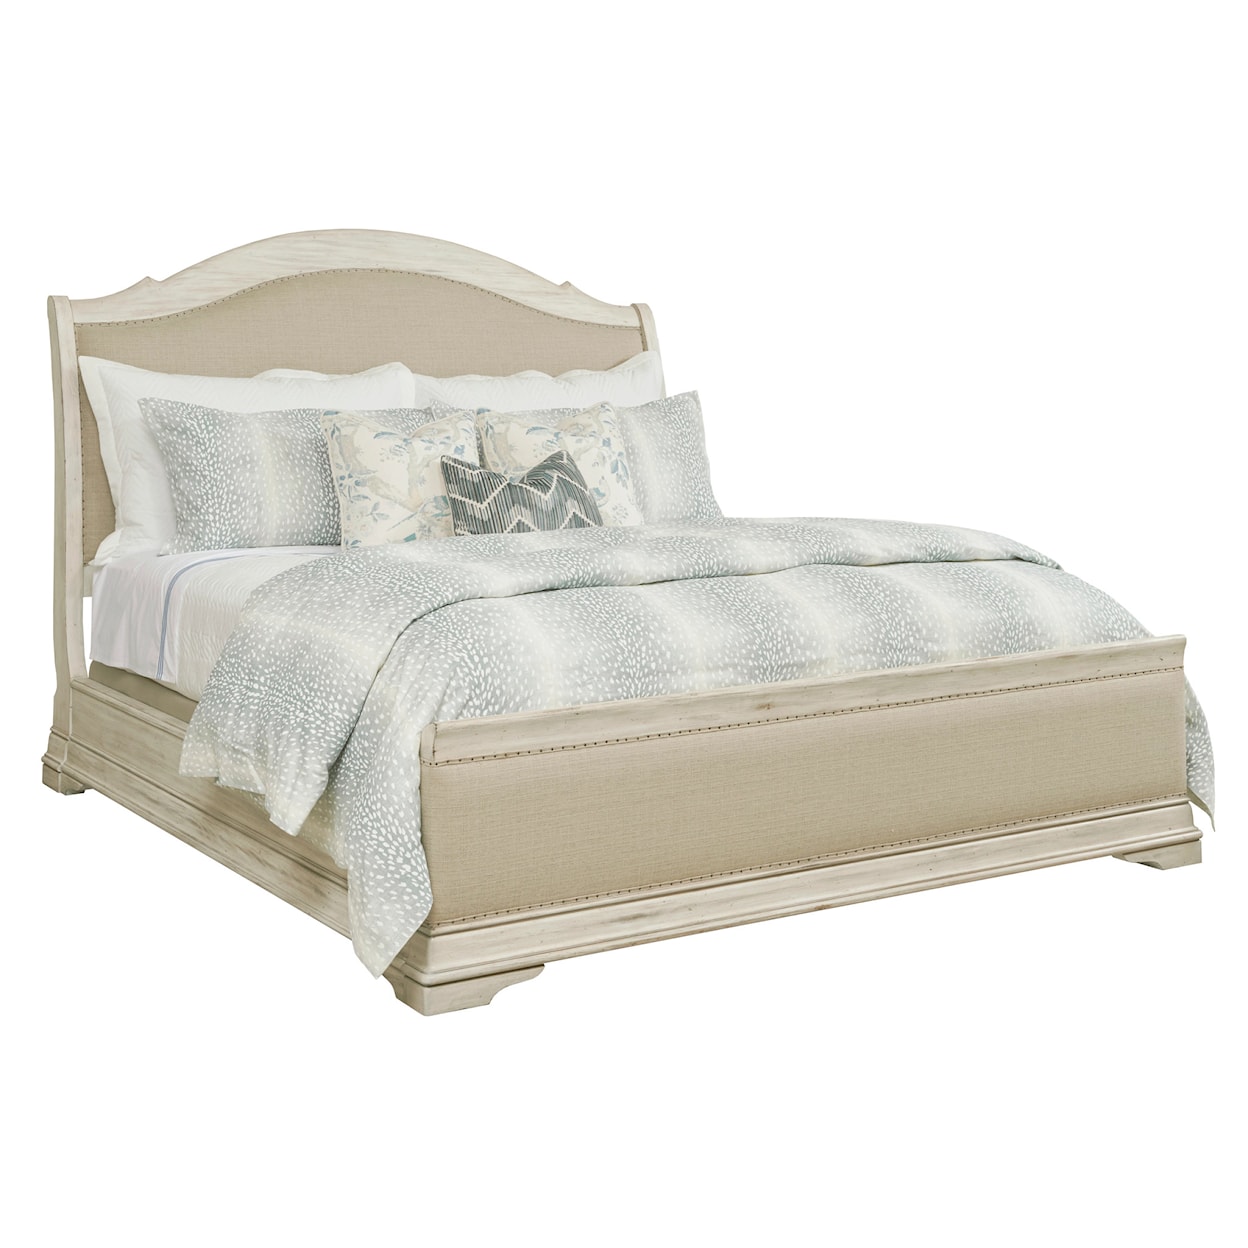 Kincaid Furniture Selwyn Queen Sleigh Bed - Complete